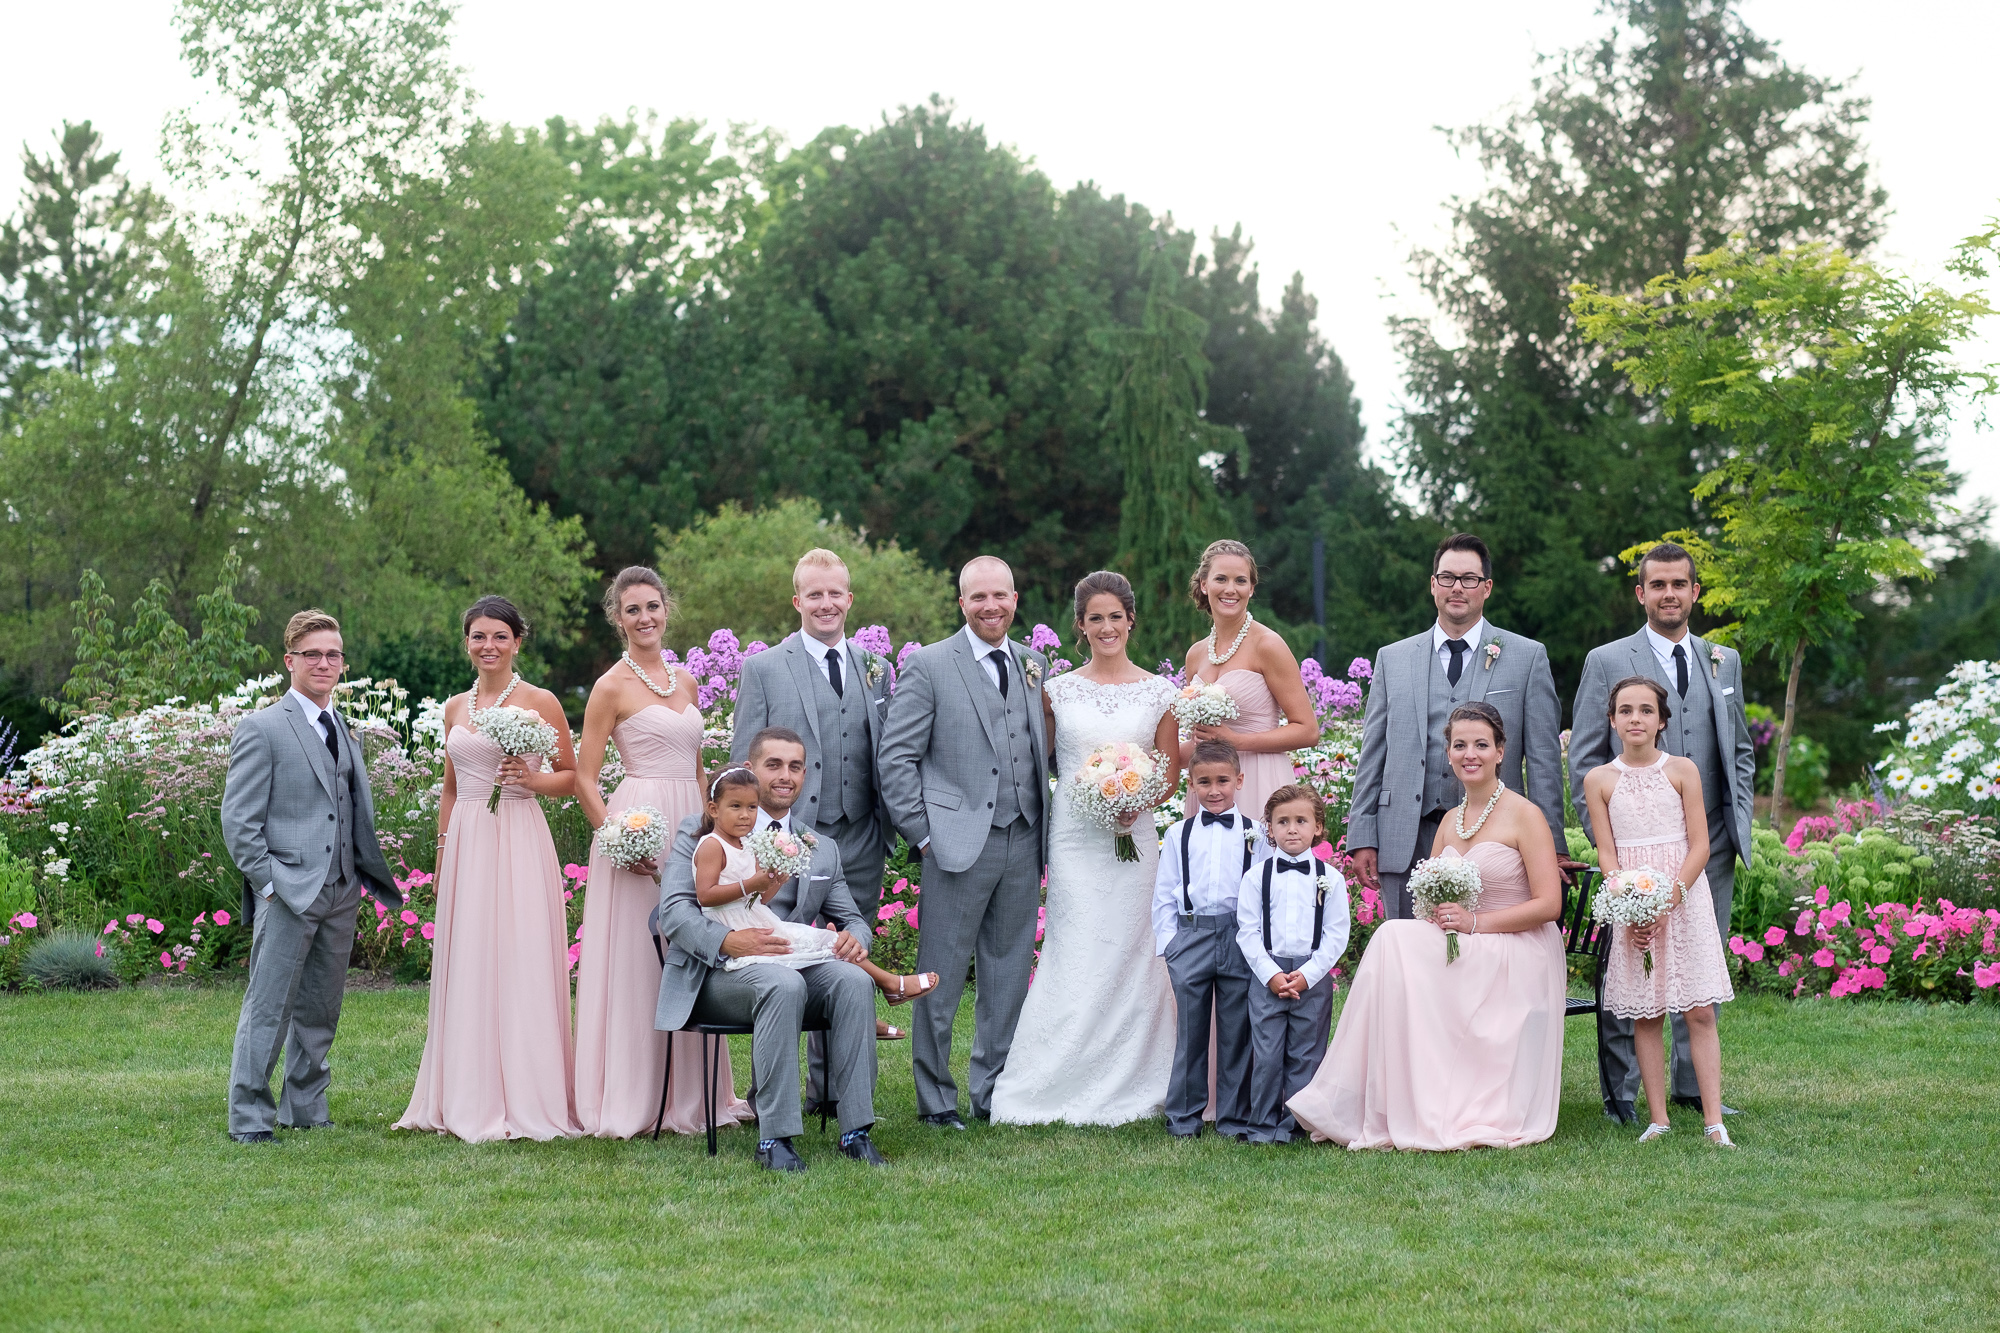  A portrait of the wedding party from Rebecca and Jeff's wedding. 